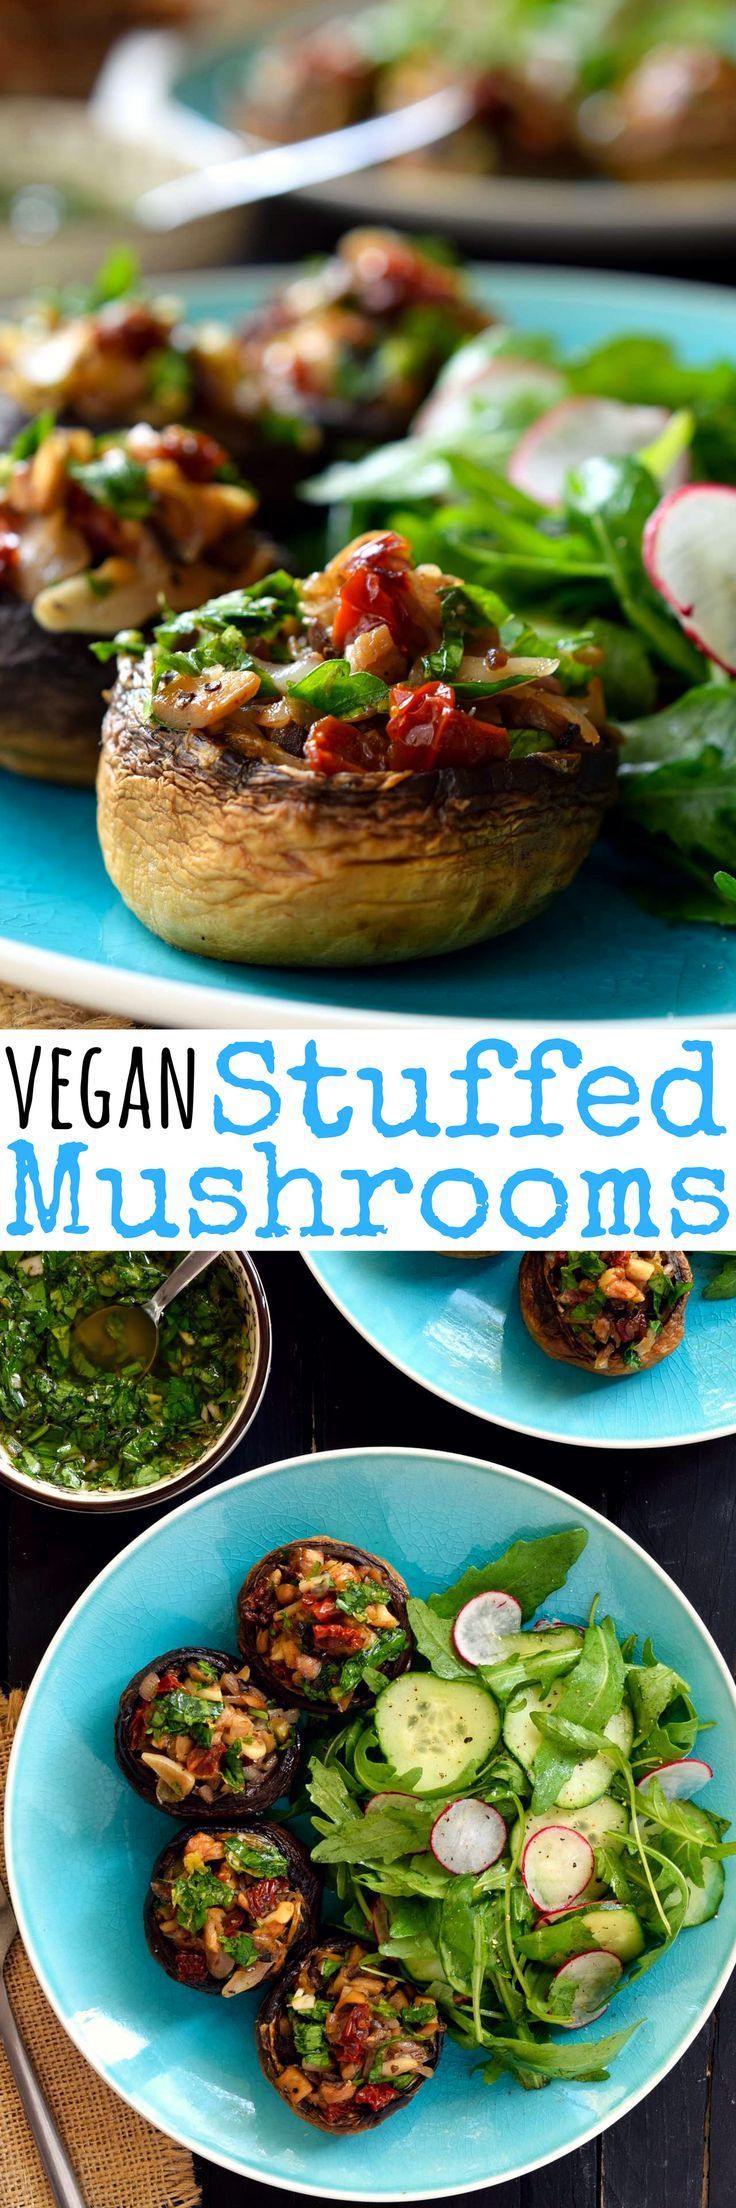 Vegan stuffed mushrooms are easy to make and packed with fresh herb-y, garlicky, citrus-y deliciousness. These little guys are